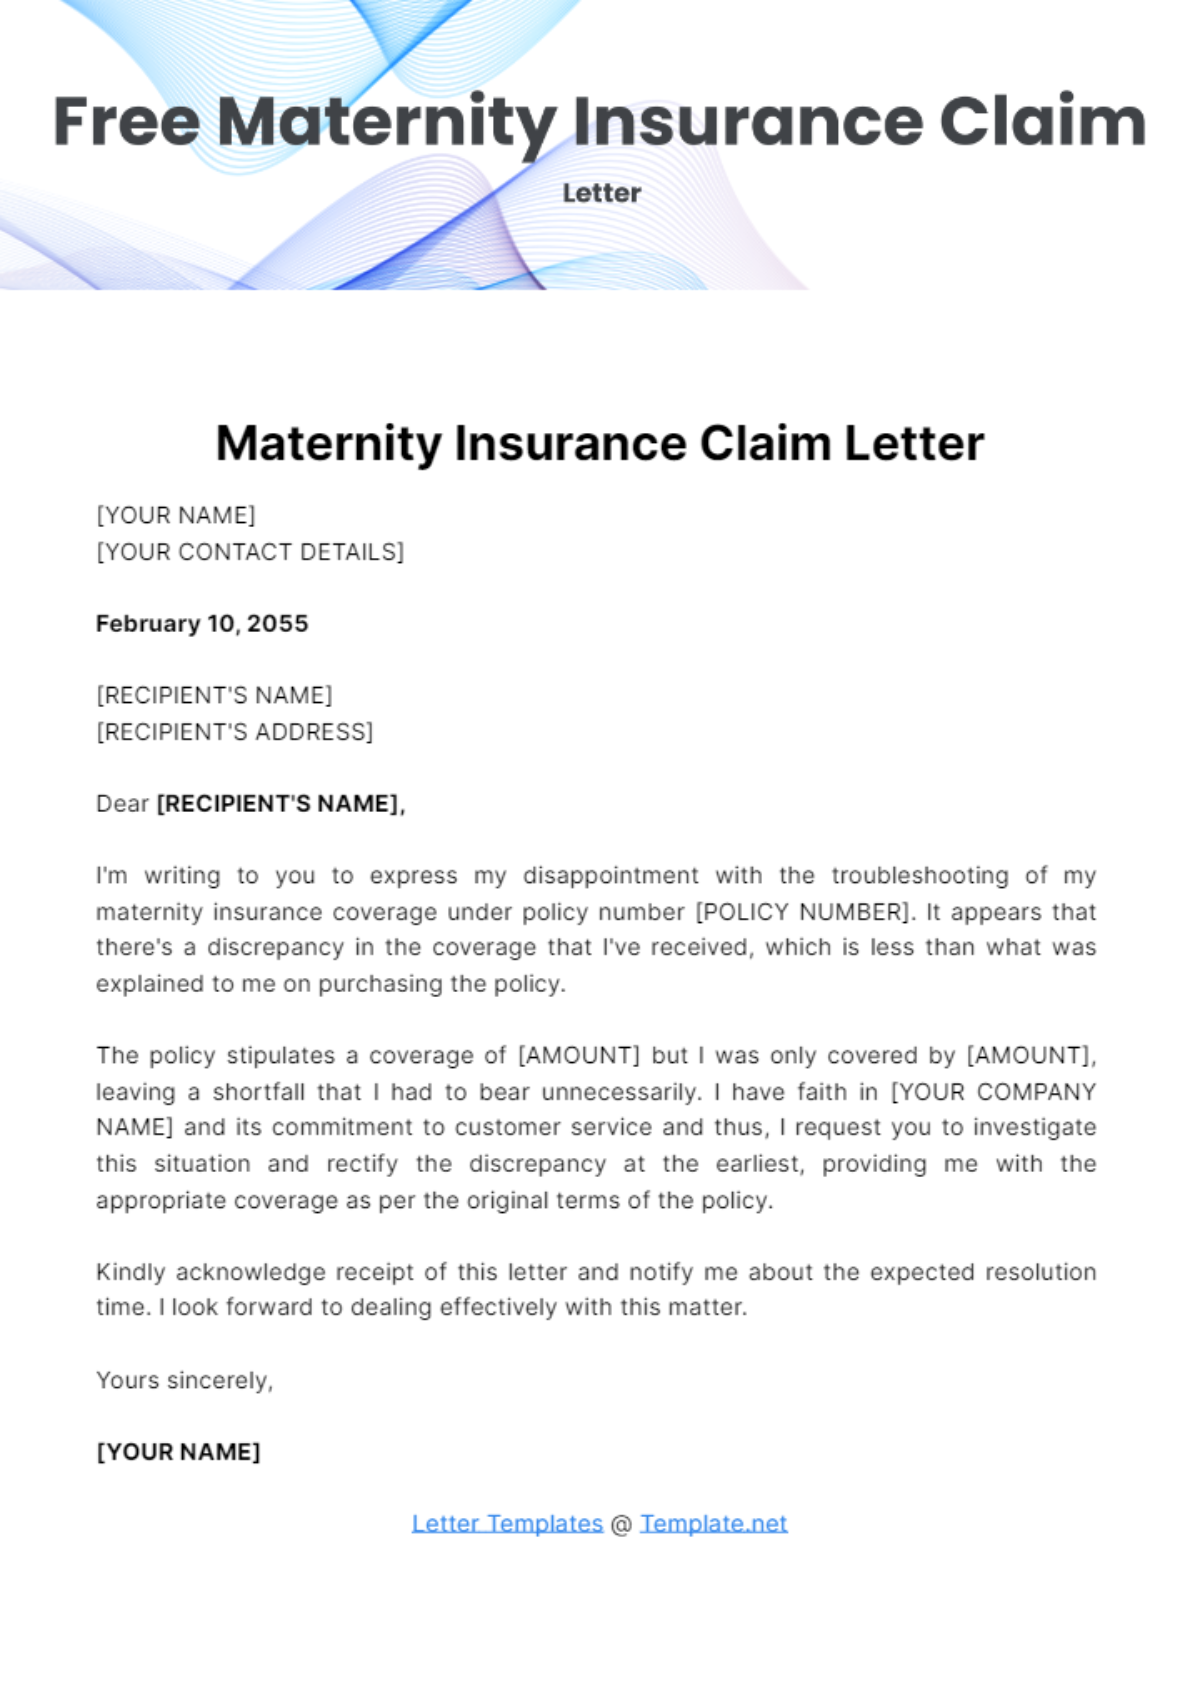 Free Maternity Insurance Claim Letter Template